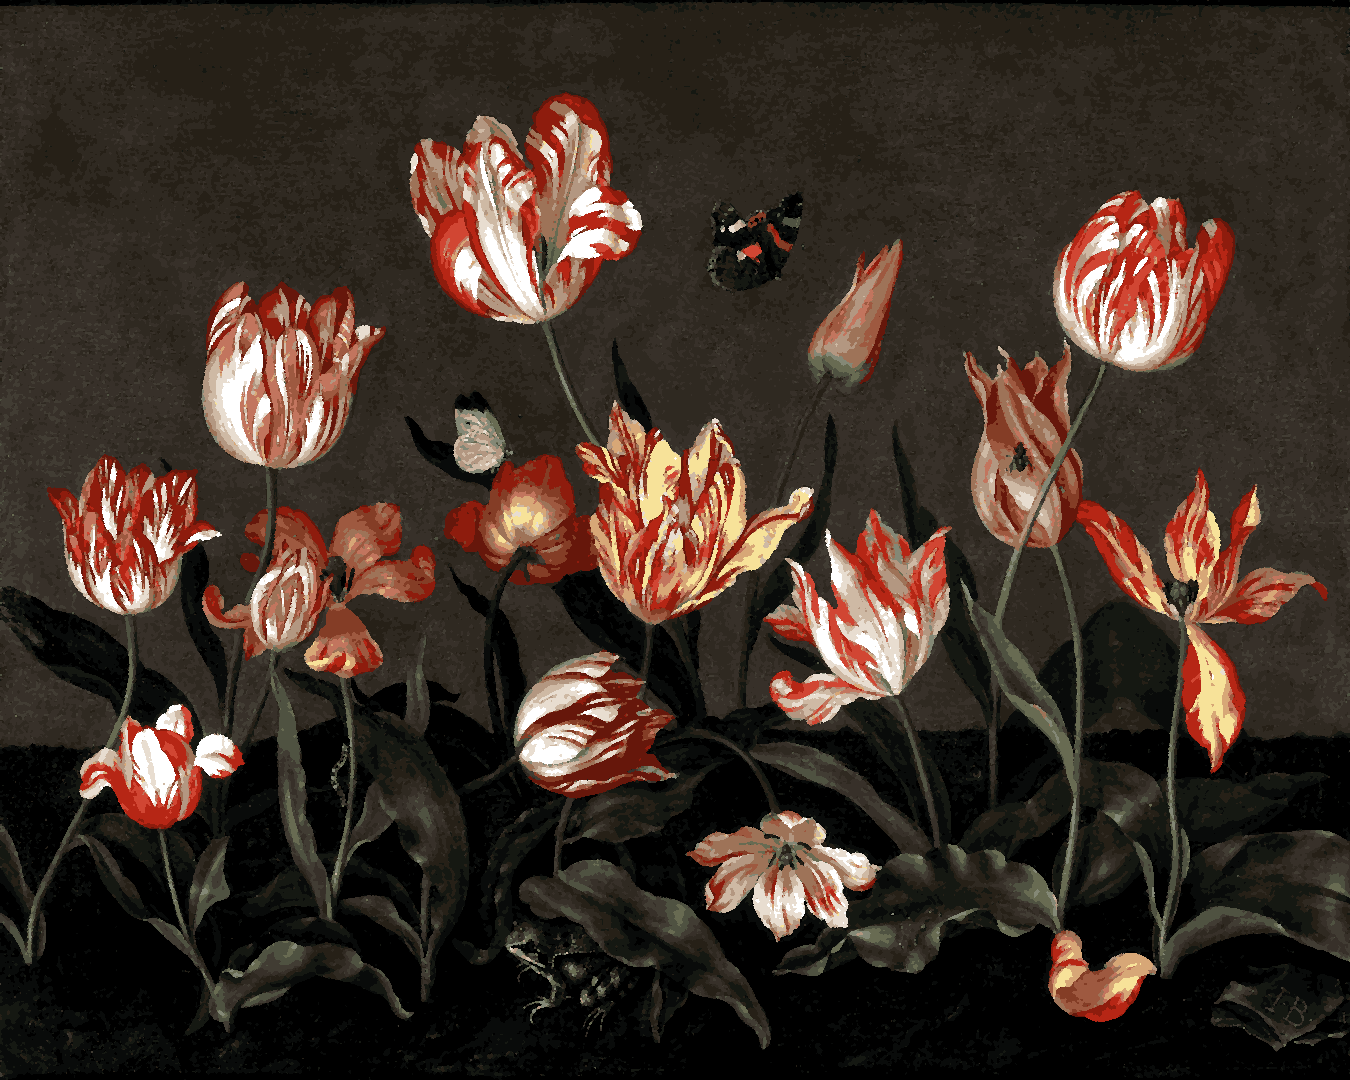 Still Life with Tulips by Johannes Bosschaert - Van-Go Paint-By-Number Kit